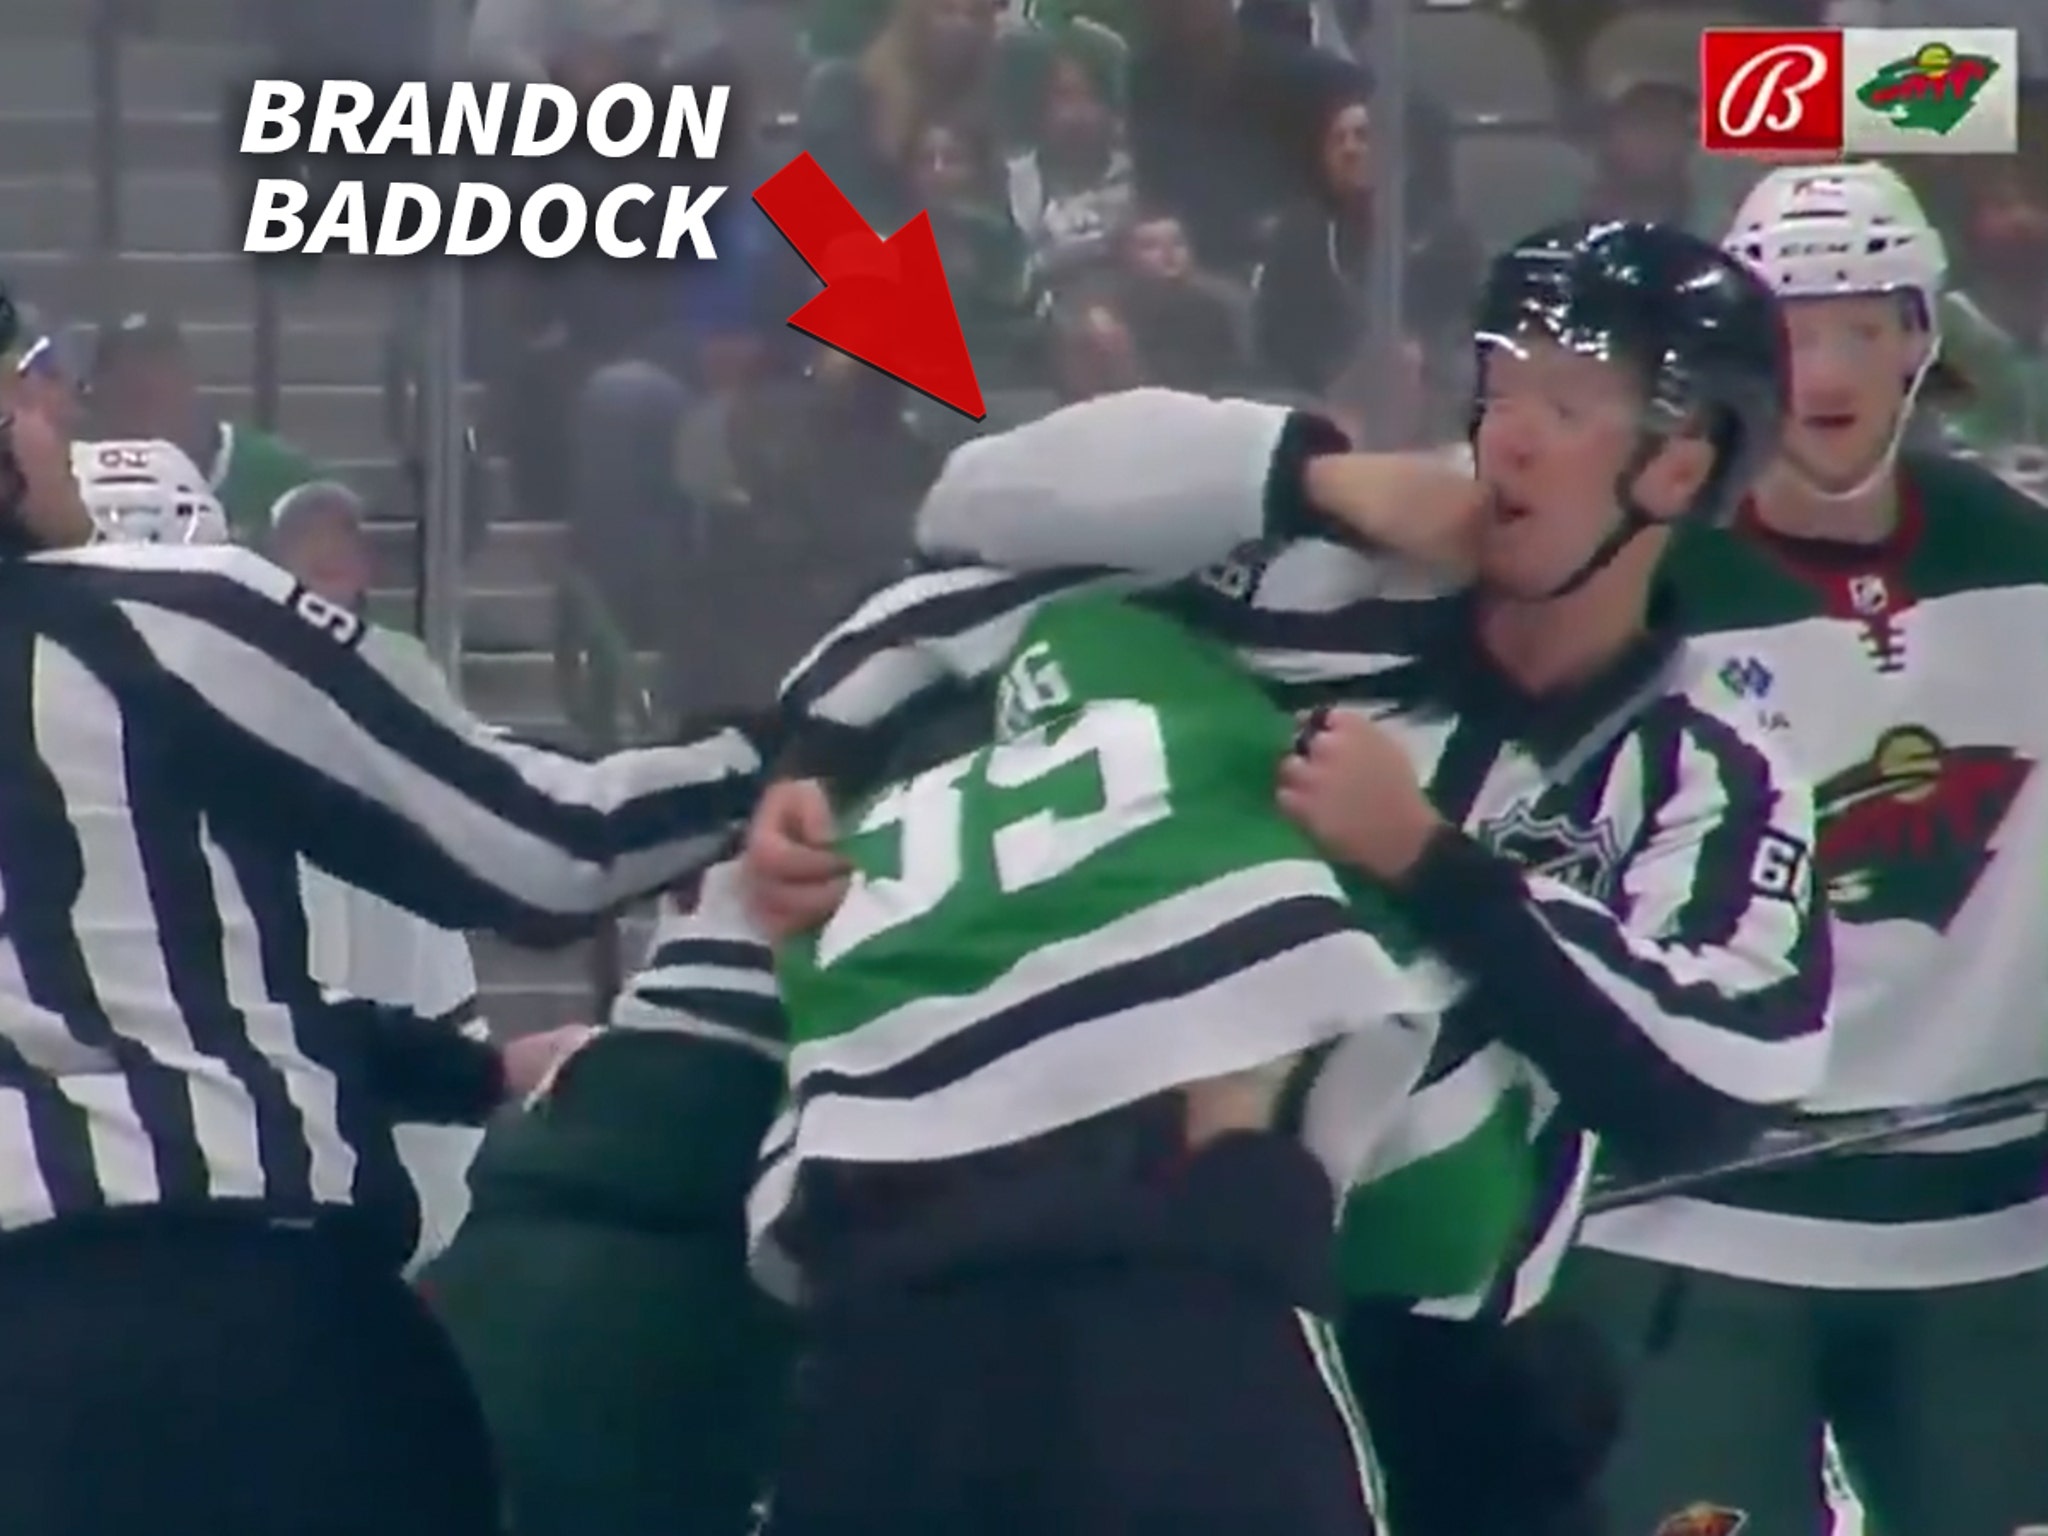 The Rink - Blackhawks Prospect Suspended For Hit, Punching Referee